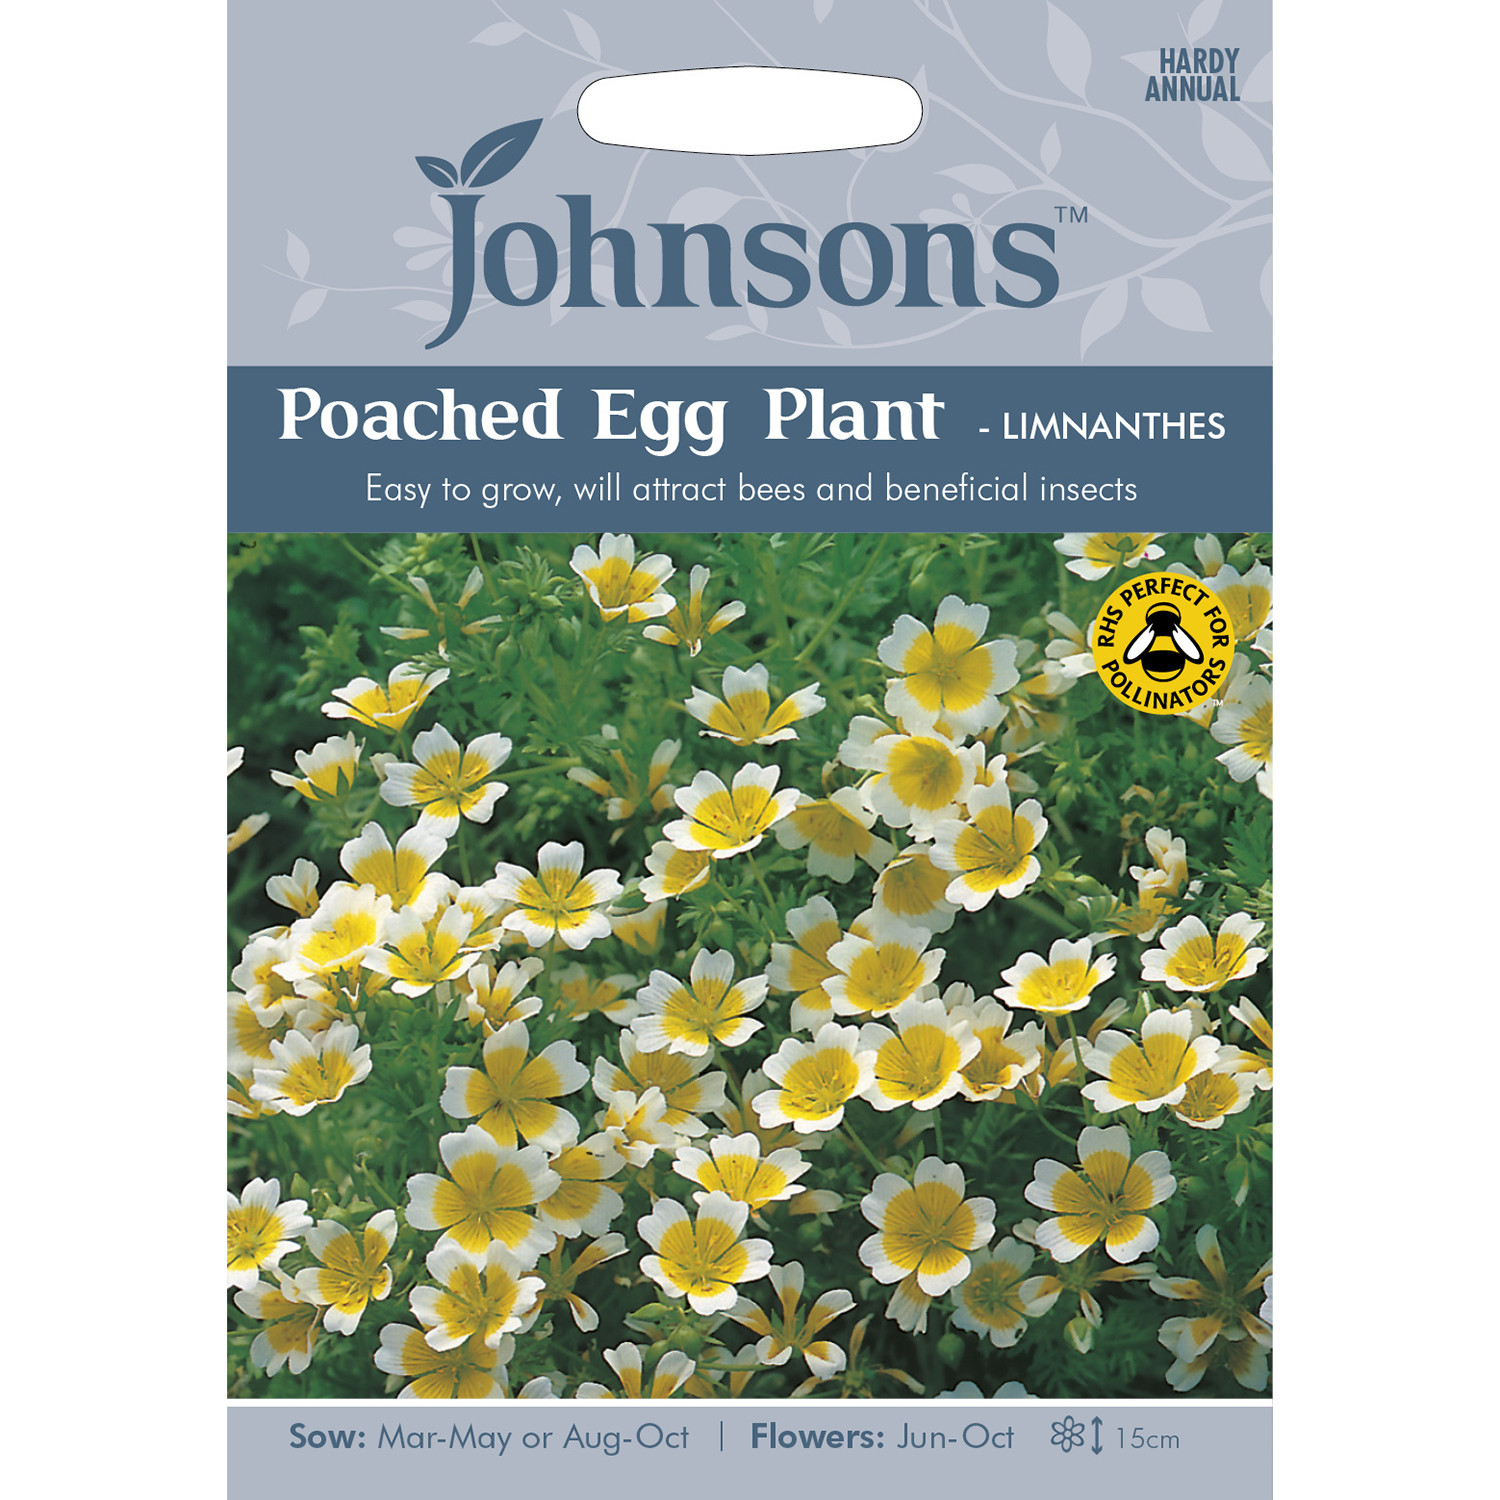 Johnsons Poached Egg Plant Limnanthes Flower Seeds Image 2